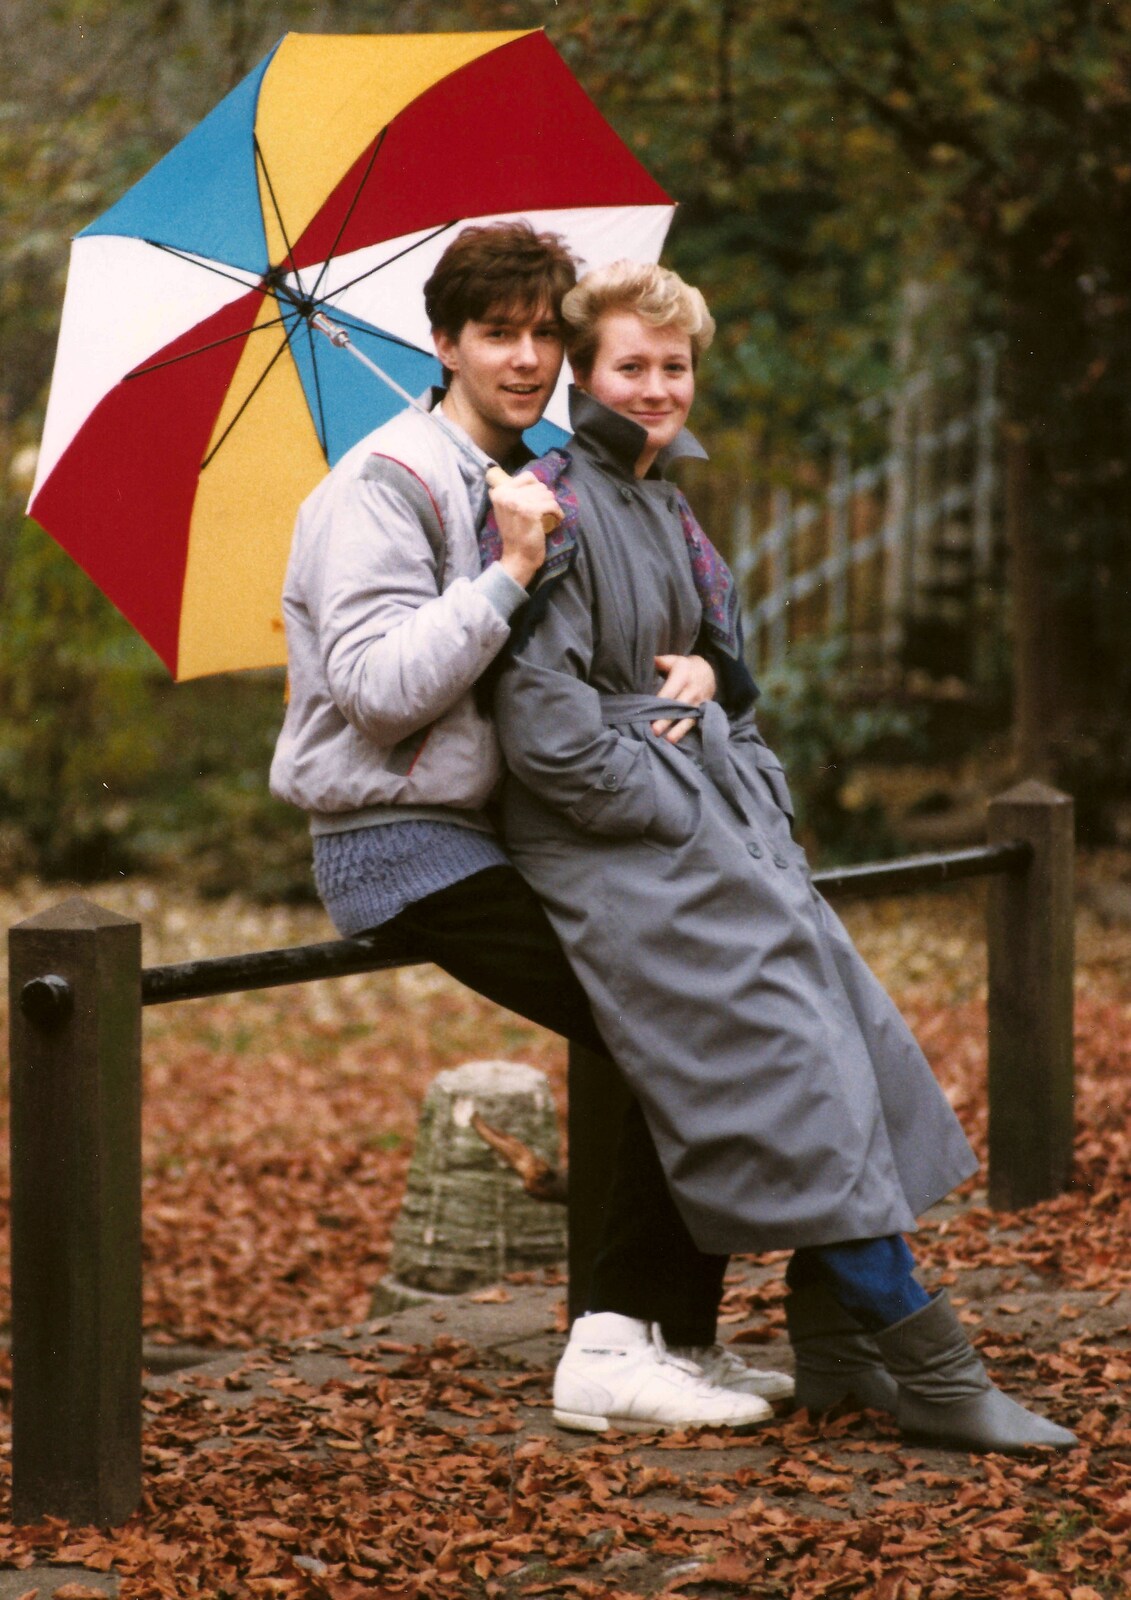 Sean, Maria and an umbrella from Sean Visits and a Trip to Costessey, Norwich, Norfolk - 14th October 1987